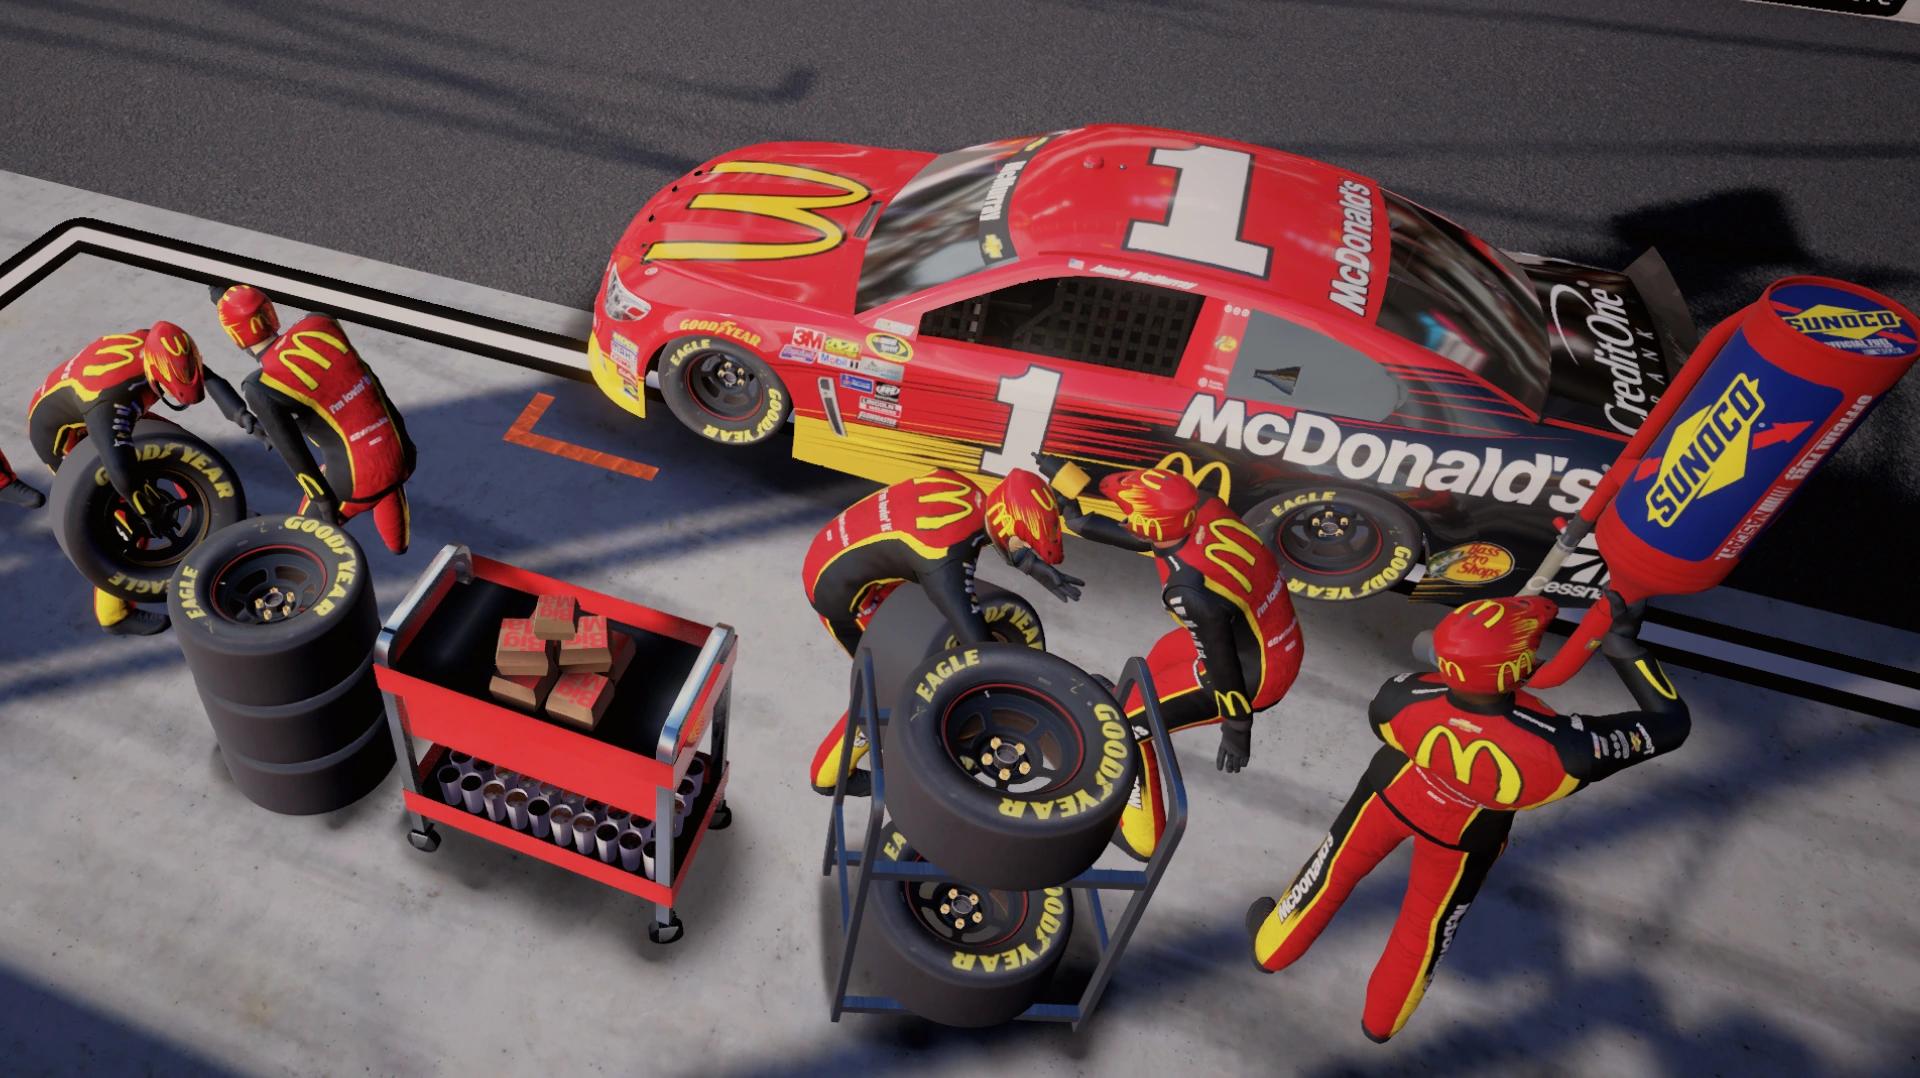 five members of the pit crew approach the McDonalds NASCAR car with new tires and gas